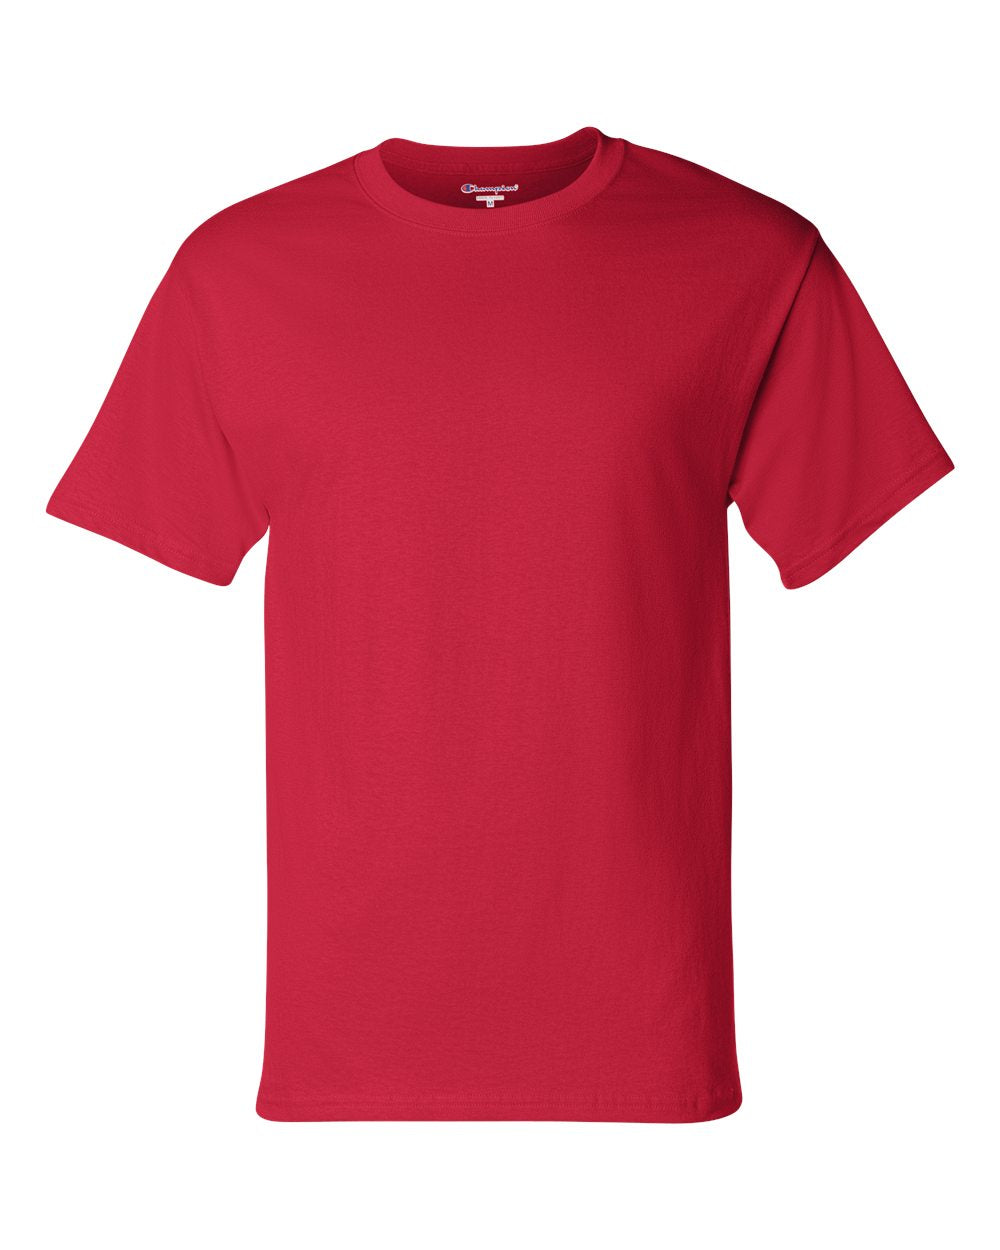 Champion Short Sleeve T-Shirt T425 #color_Red